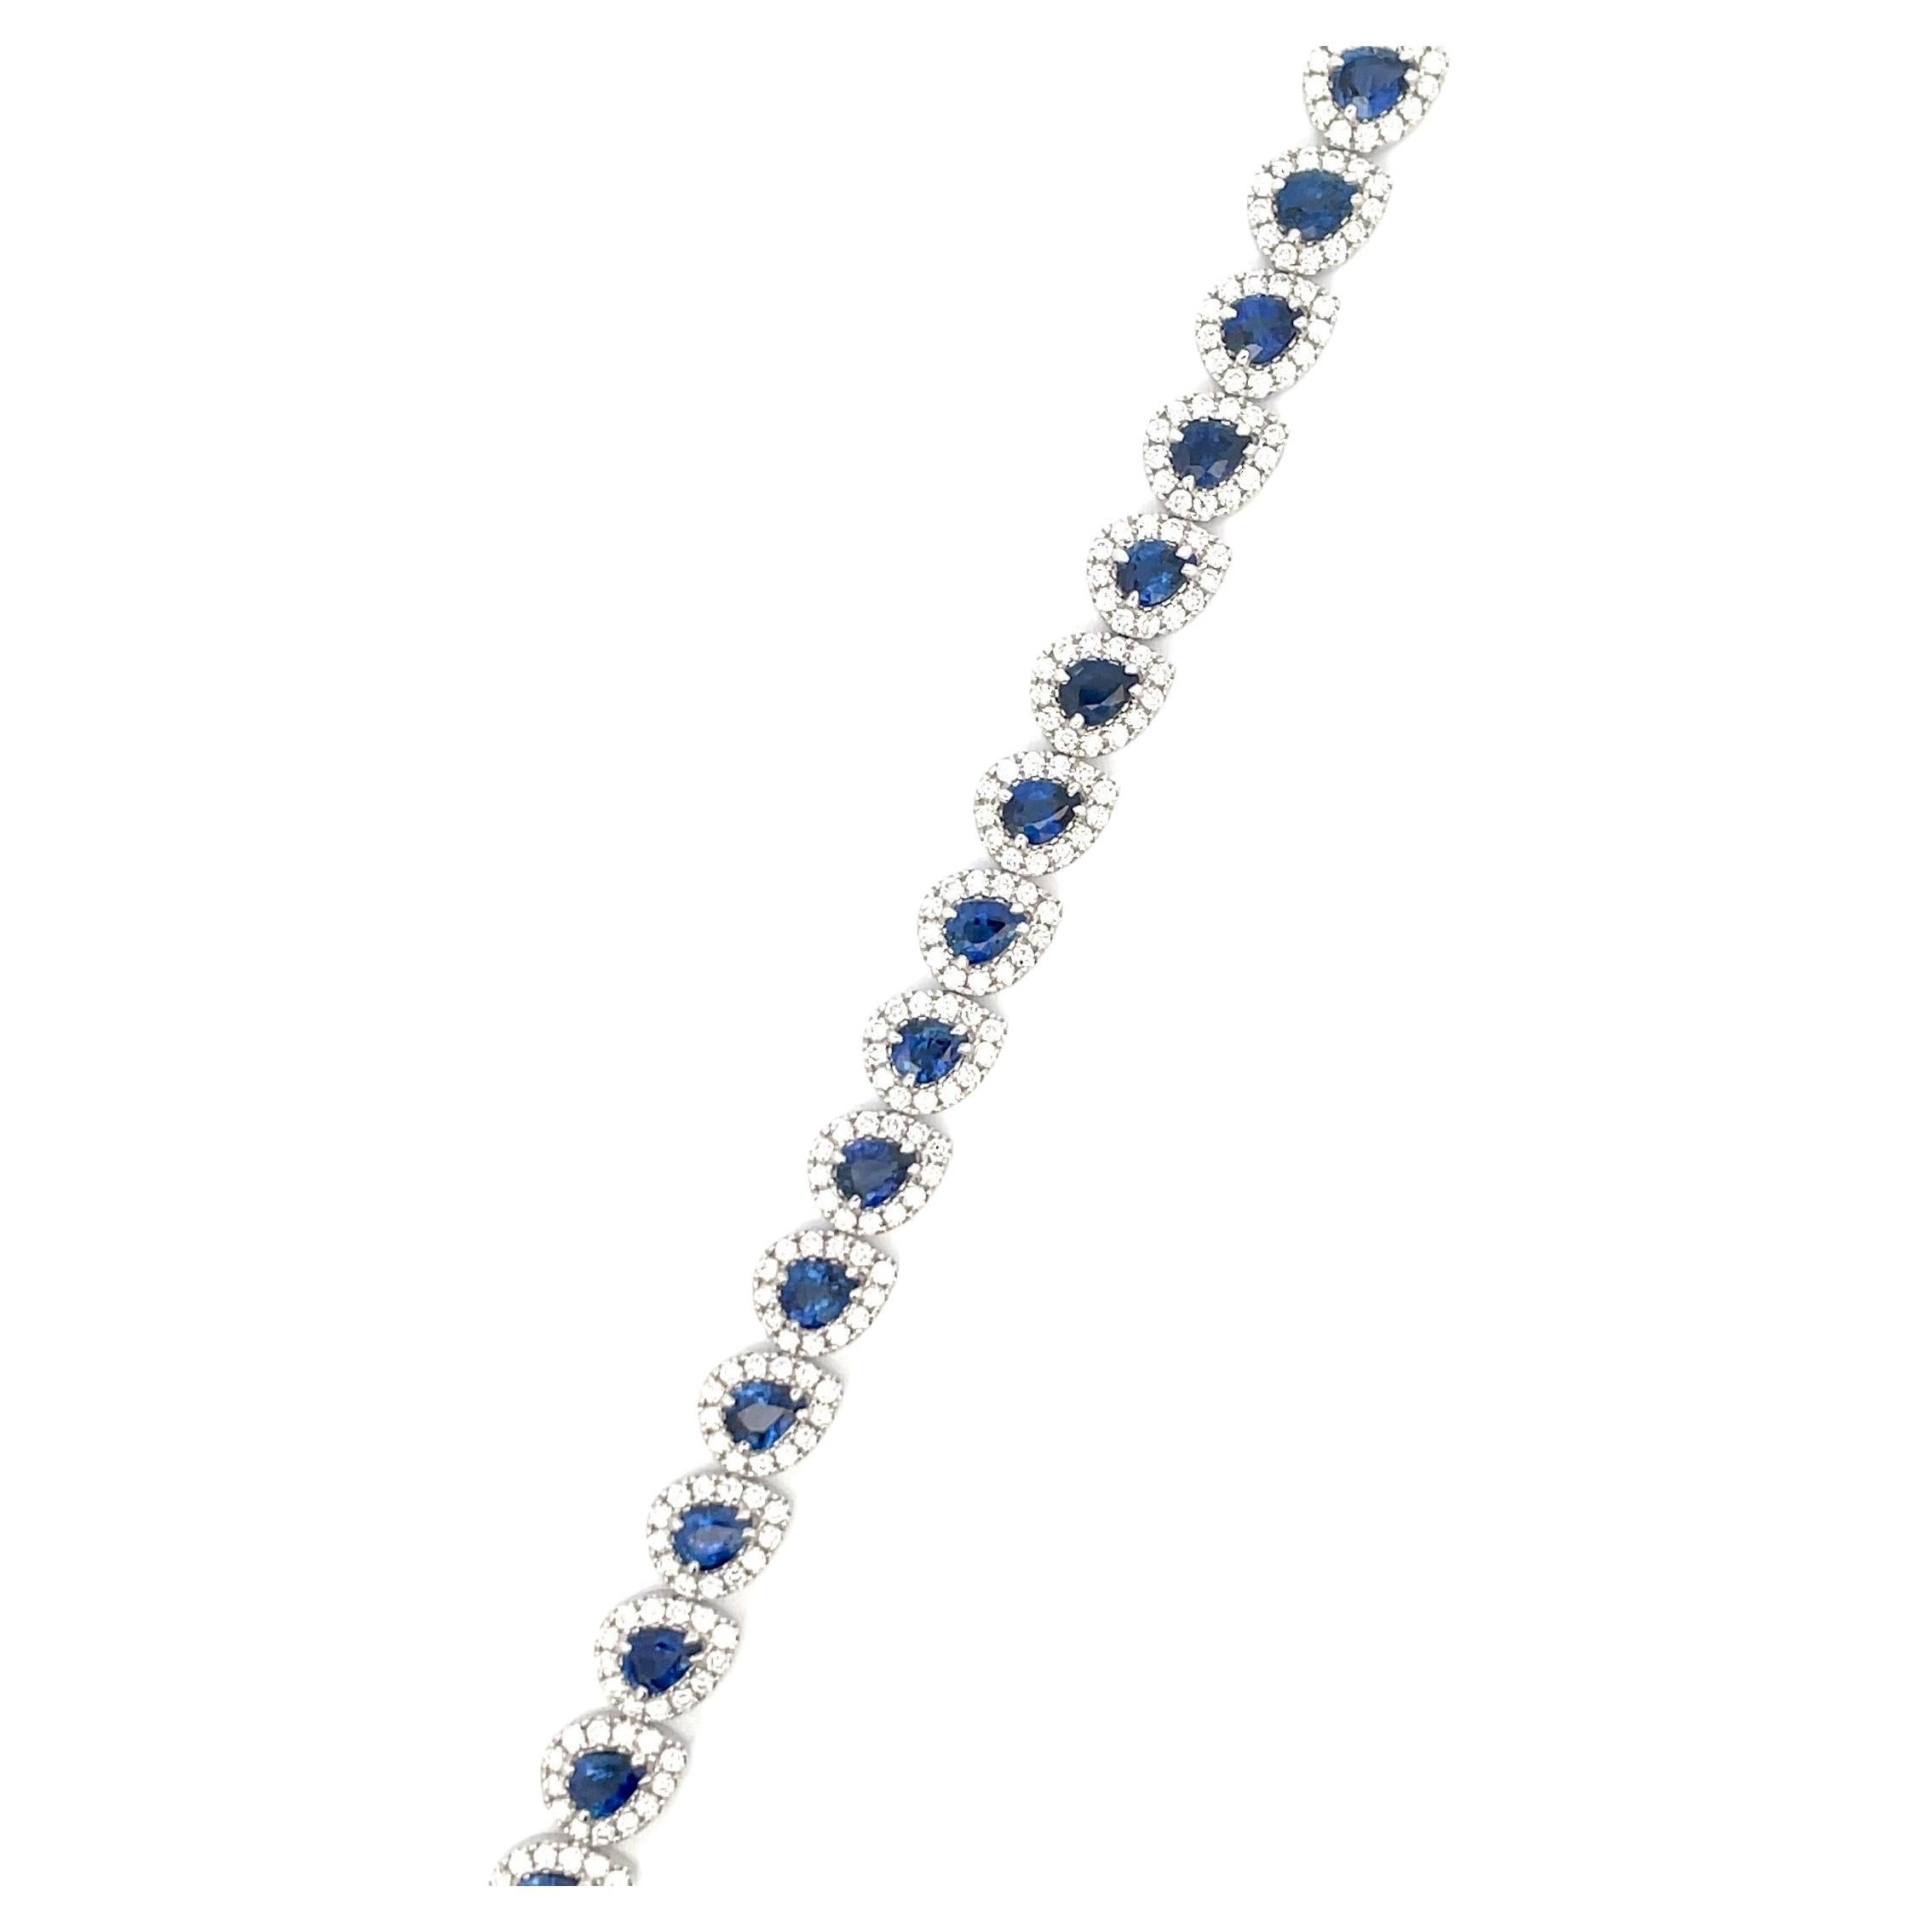 Twenty-three Pear shape blue Sapphires weighing 8.98 Carats flanked with a halo of 299 round brilliants weighing 3.31 carats, in 18 Karat White Gold. 
Color G-H
Clarity SI